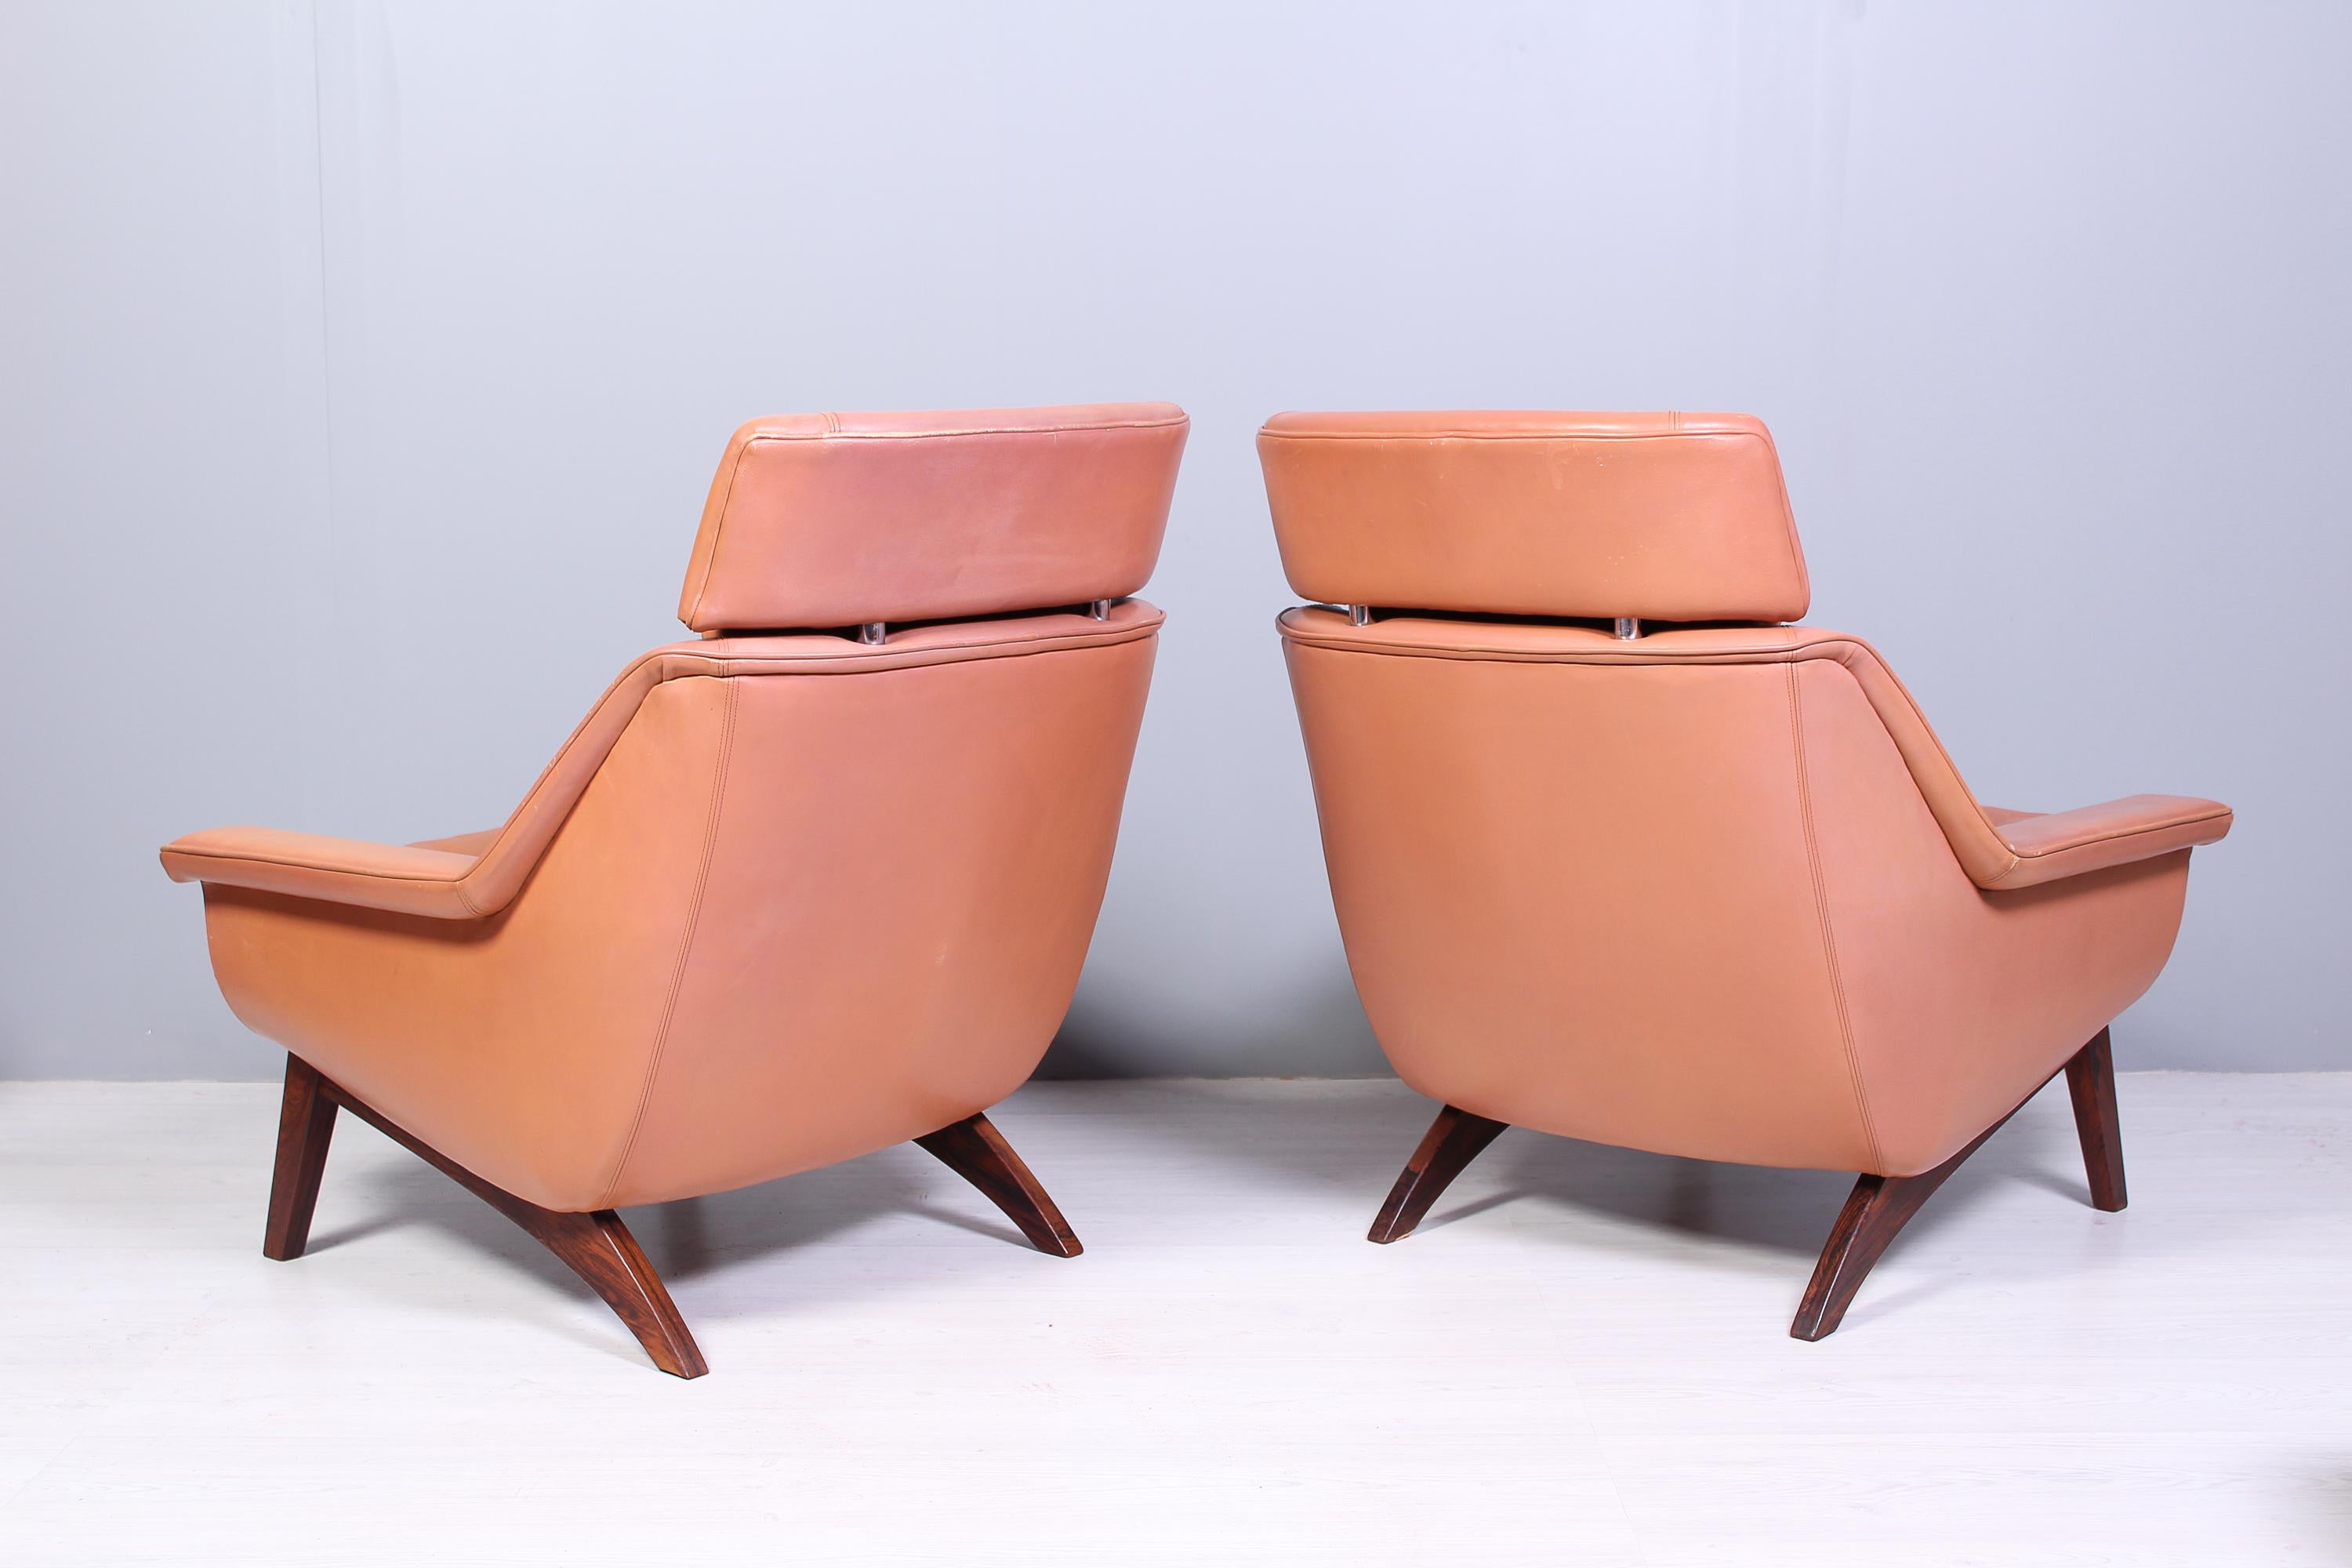 Leather & Rosewood Lounge Chairs and Ottoman by Werner Langenfled, Denmark 1960s For Sale 2